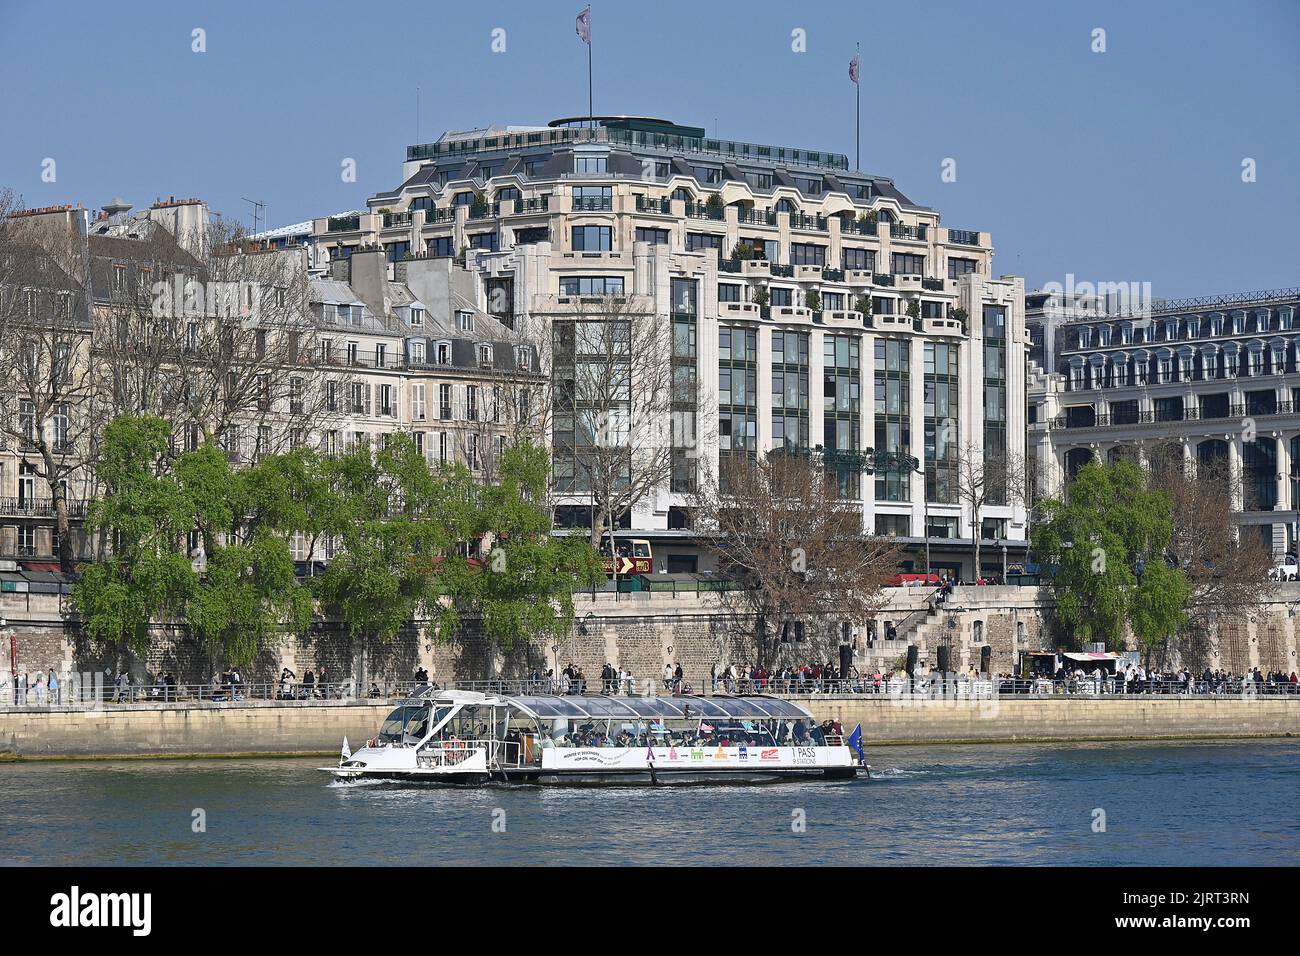 An LVMH store (Moet Hennessy. Louis Vuitton) at 22 Avenue Montaigne on  April 27, 2020 in Paris, France. Photo by David Niviere/ABACAPRESS.COM  Stock Photo - Alamy